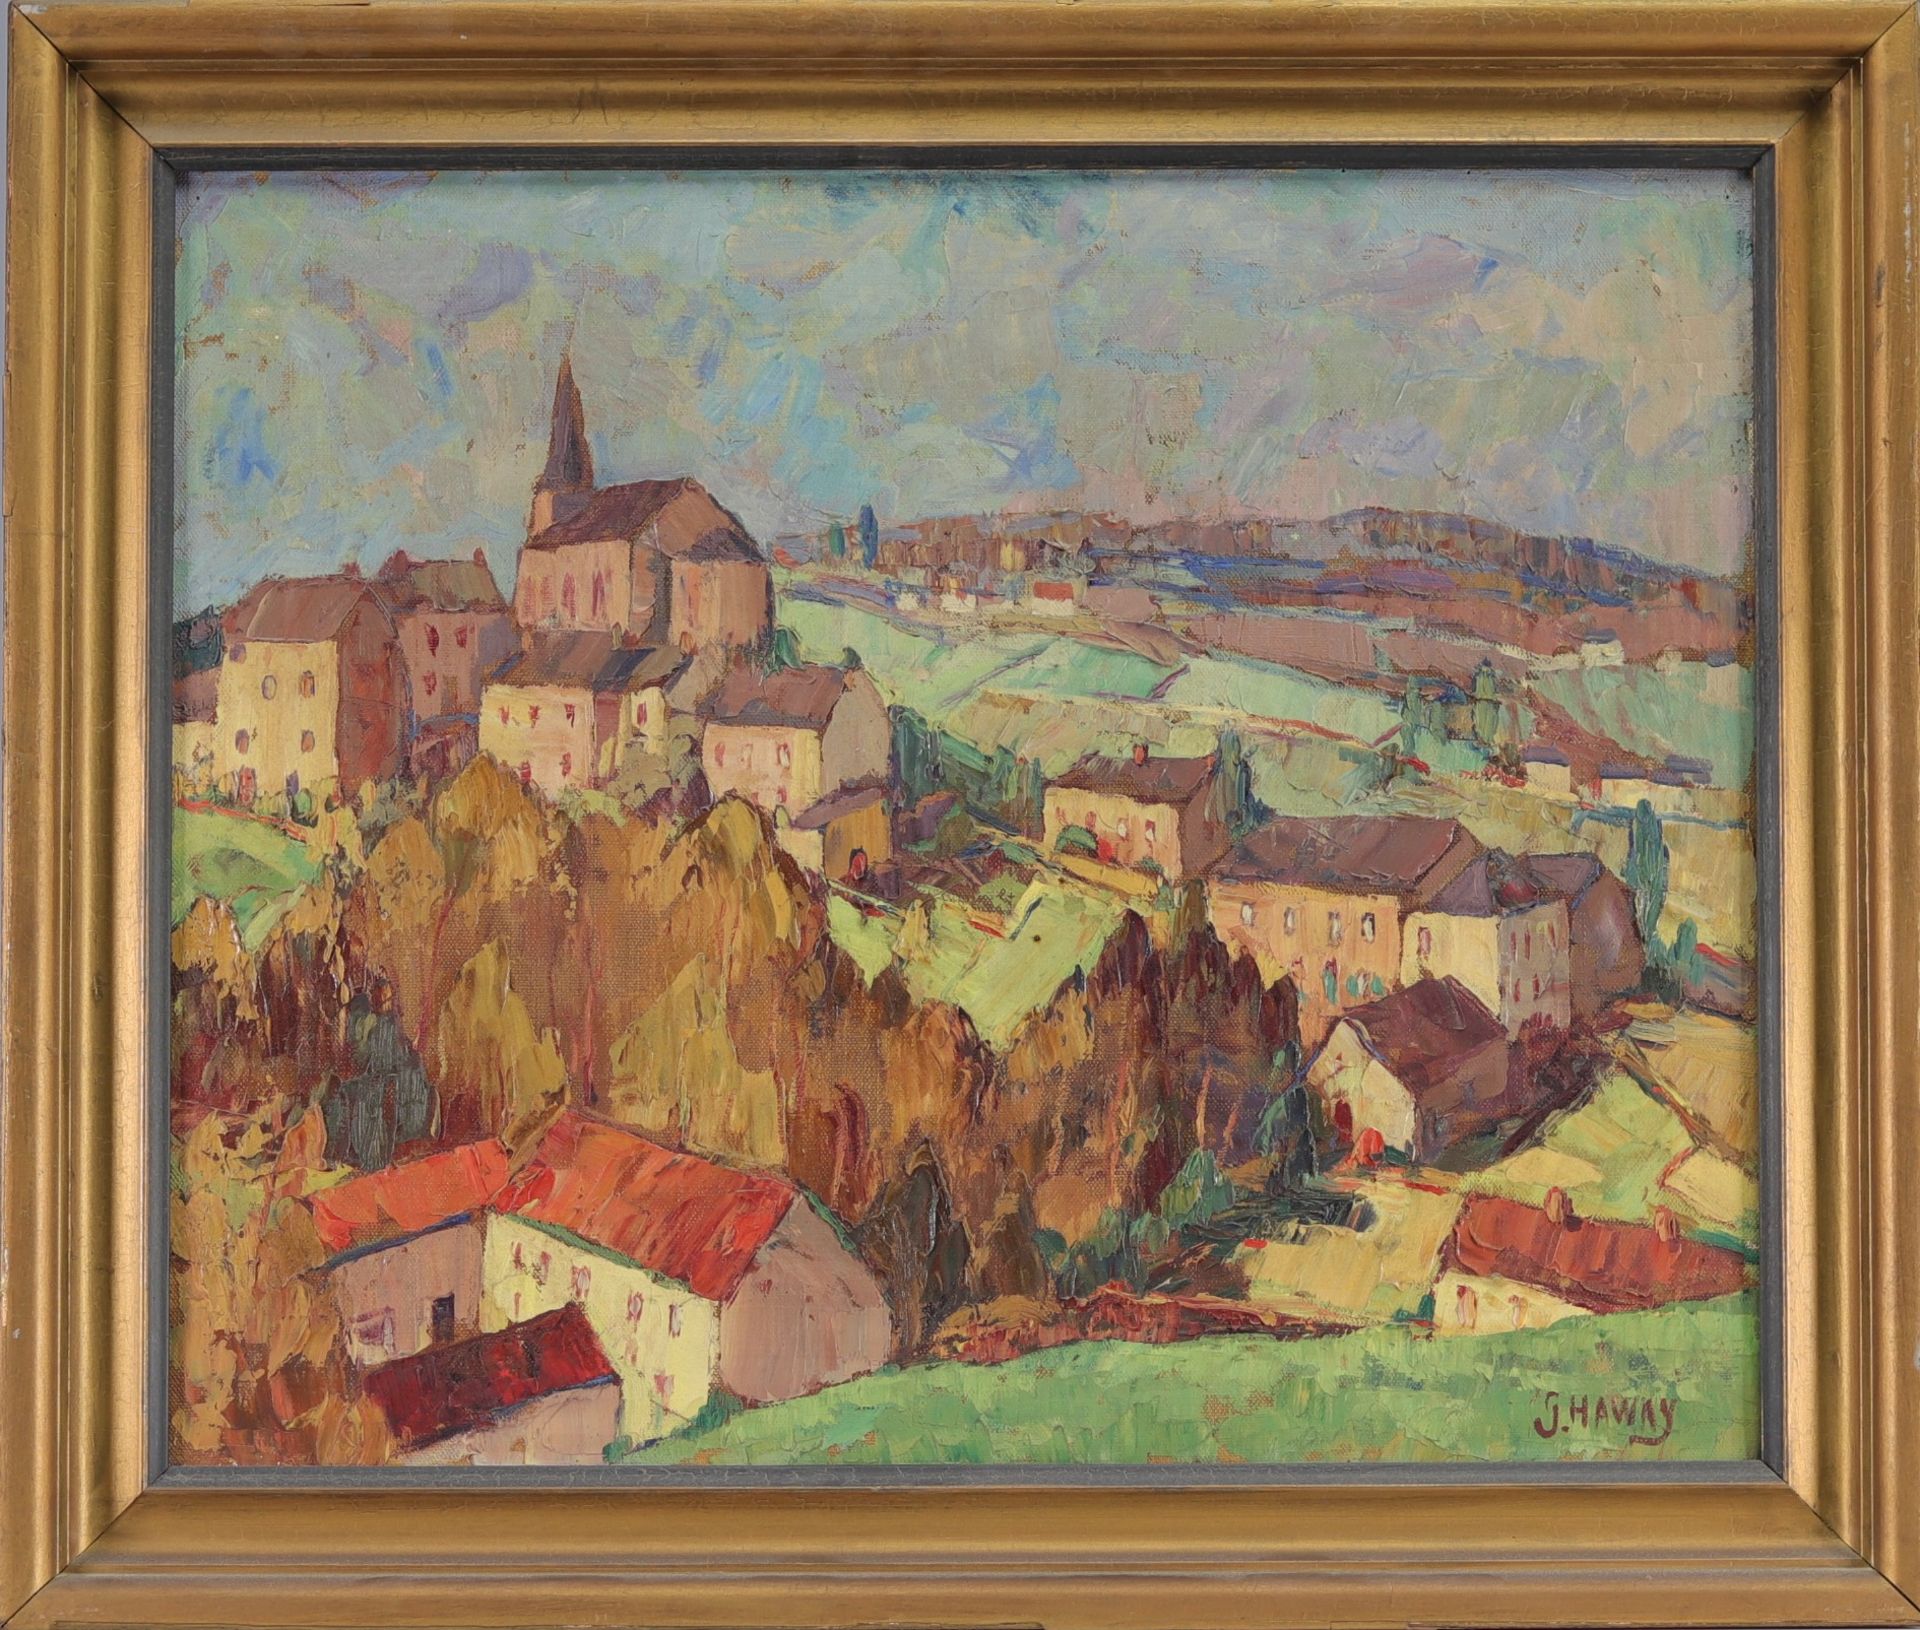 Georges HAWAY (1895-1945) "View of the village Moha" Oil on canvas. - Bild 2 aus 4